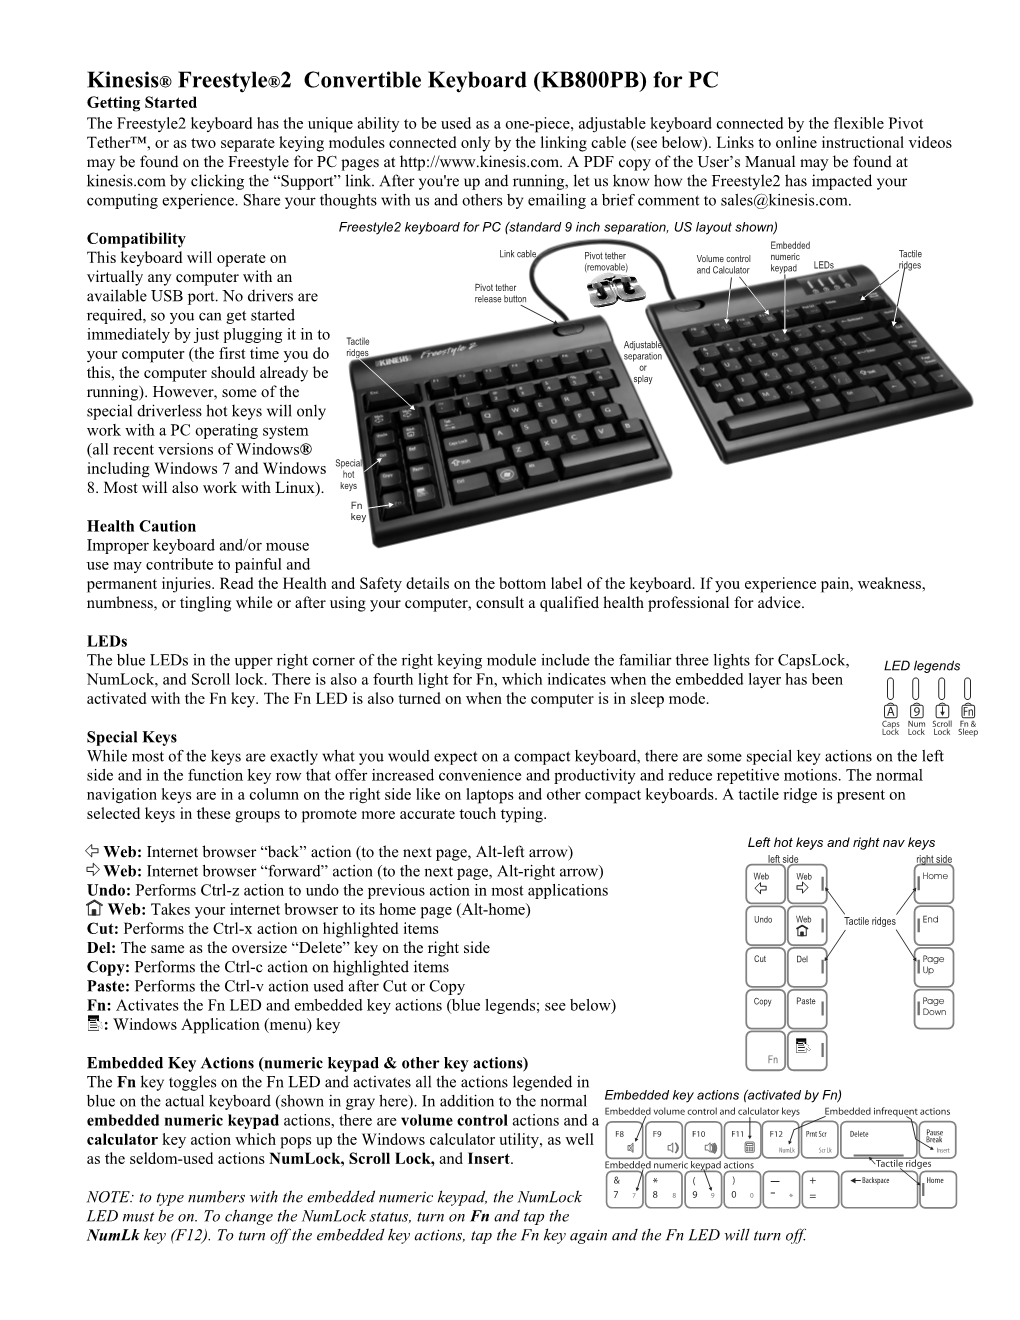 Kinesis® Freestyle®2 Convertible Keyboard (KB800PB) for PC Getting Started